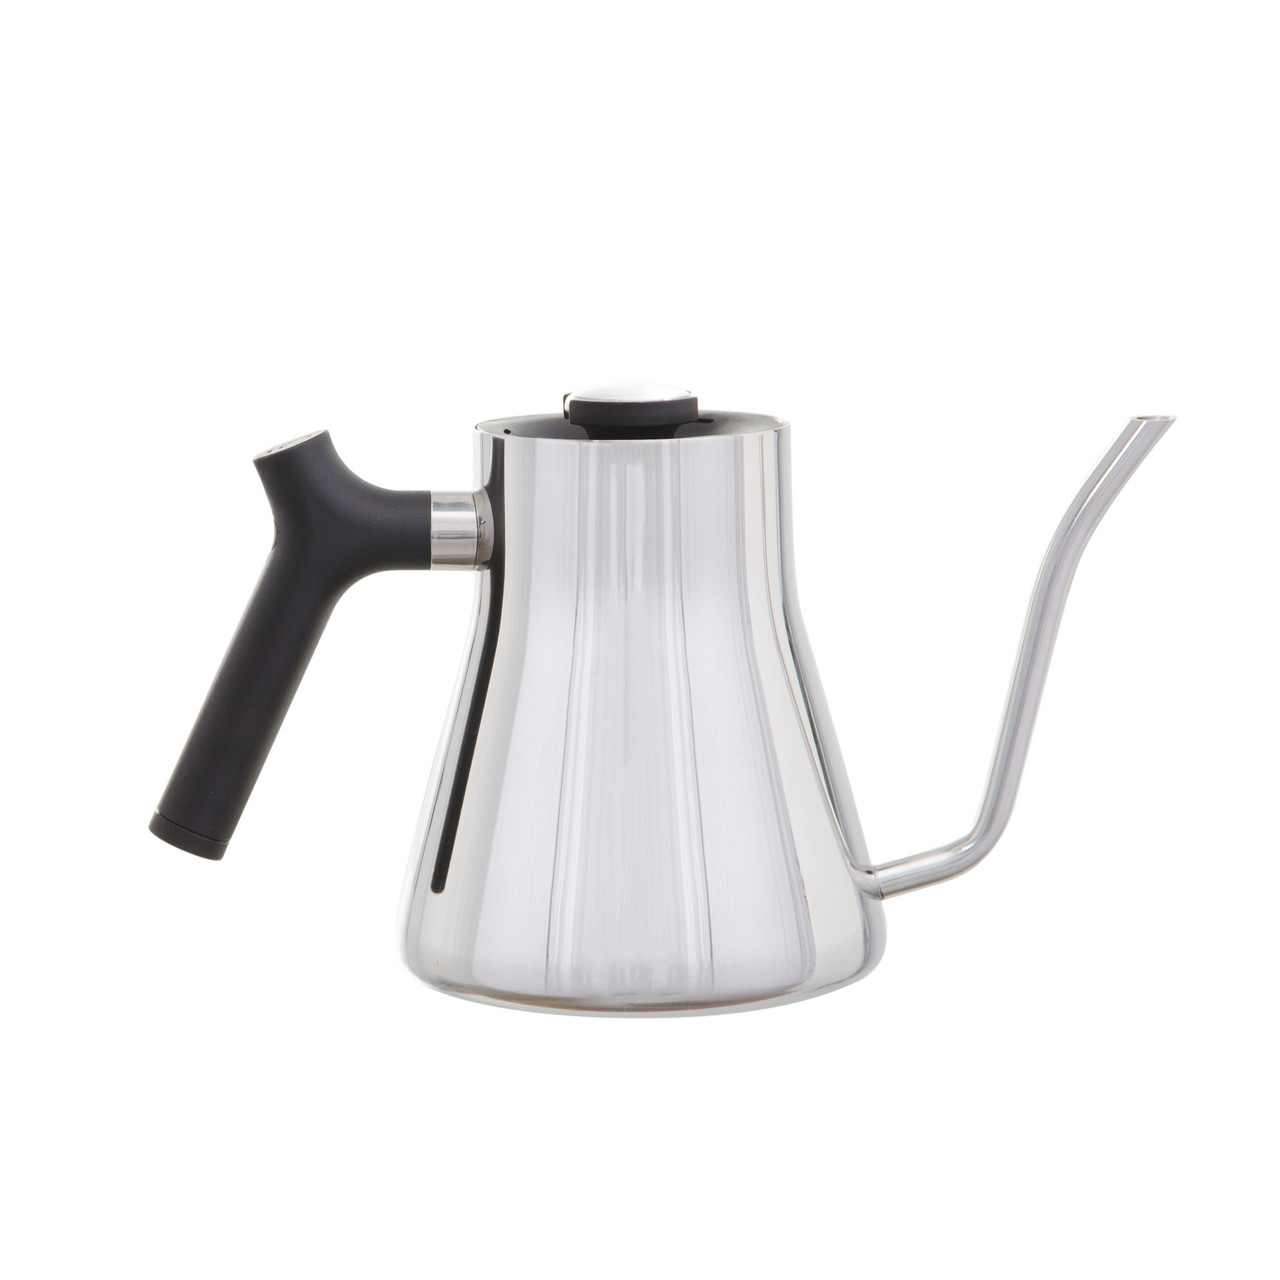 https://cdn11.bigcommerce.com/s-6h7ychjk4/images/stencil/1280x1280/products/8815/88885/fellow-stagg-kettle-steel__31207.1600260903.jpg?c=1&imbypass=on